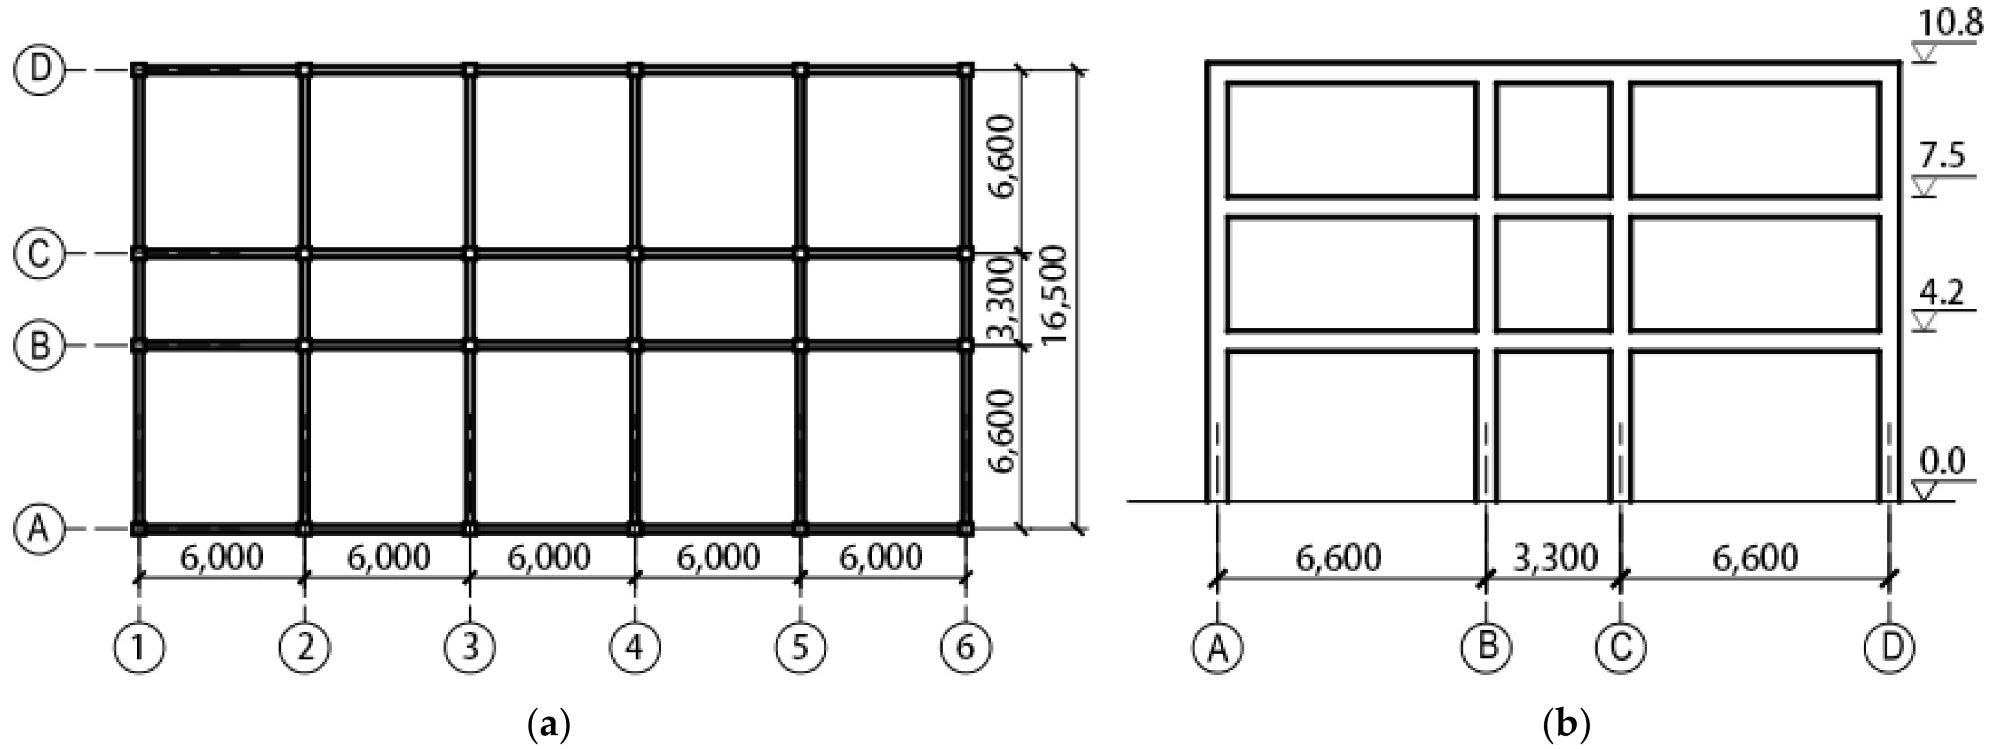 Layouts of the structure (3-story frame as an example): (a) plan layout (unit: mm); (b) elevation layout (unit of elevation: m; unit of bay: mm).